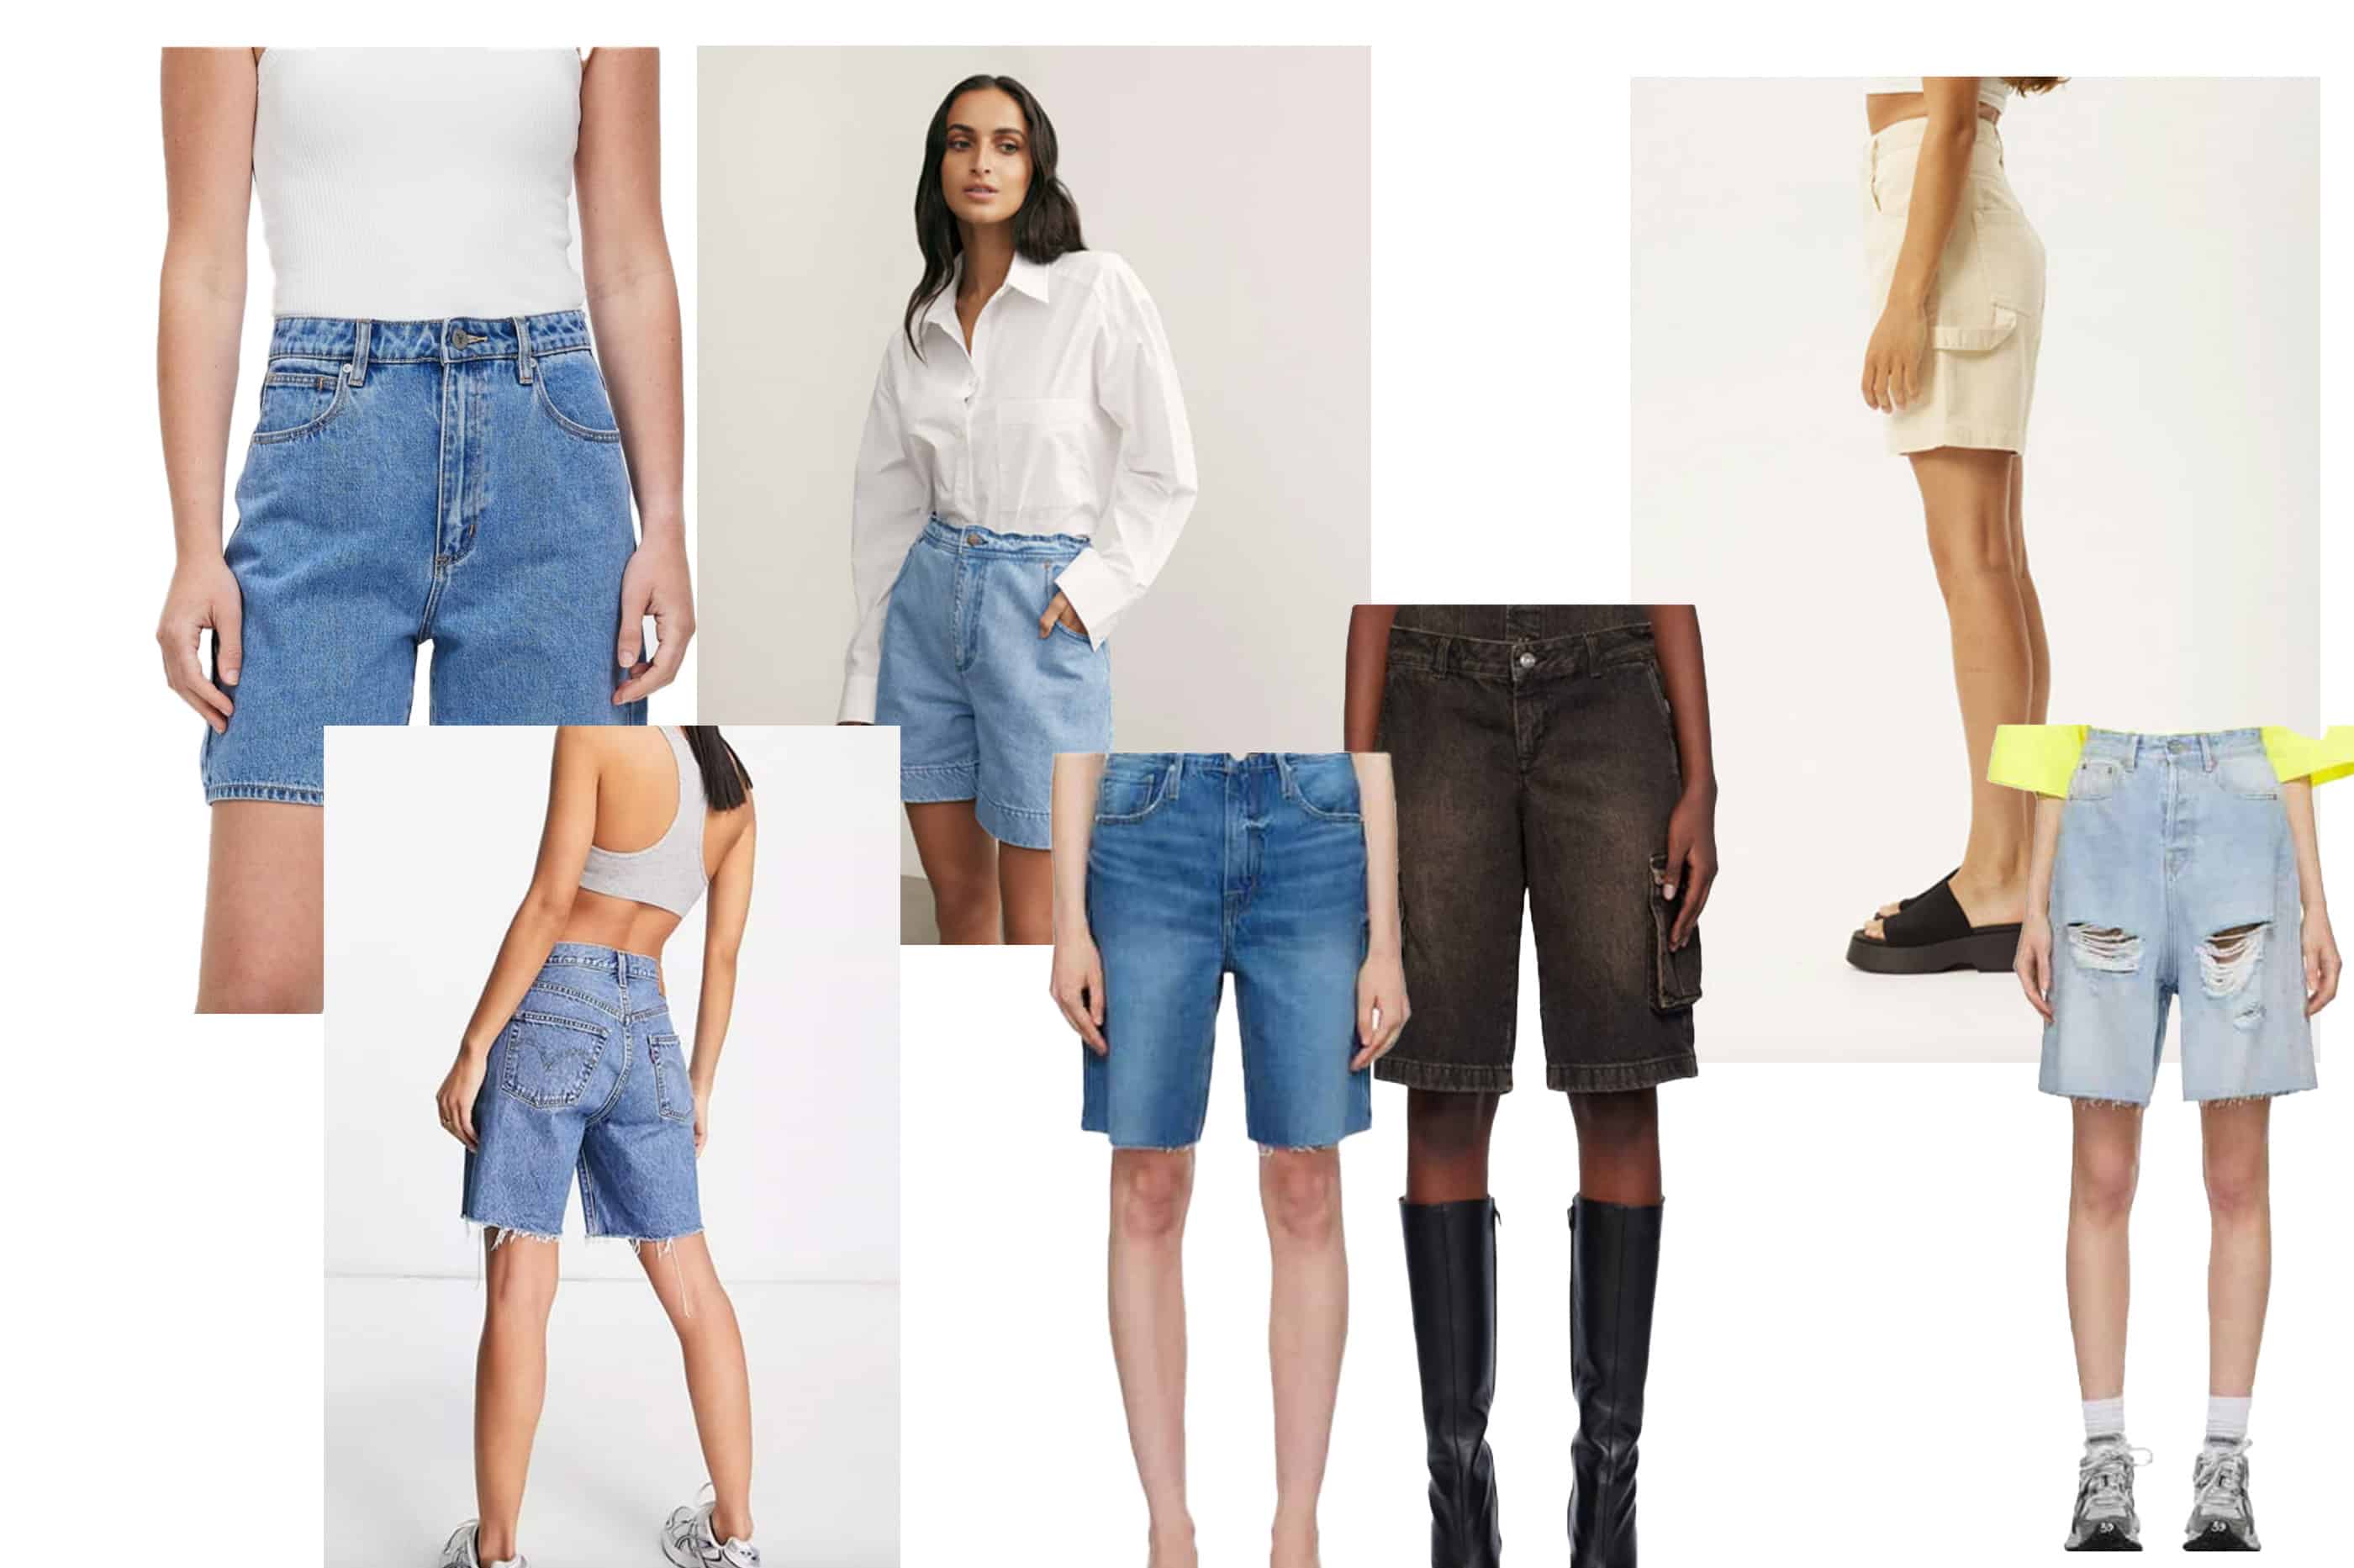 Where to find the perfect pair of summer jorts